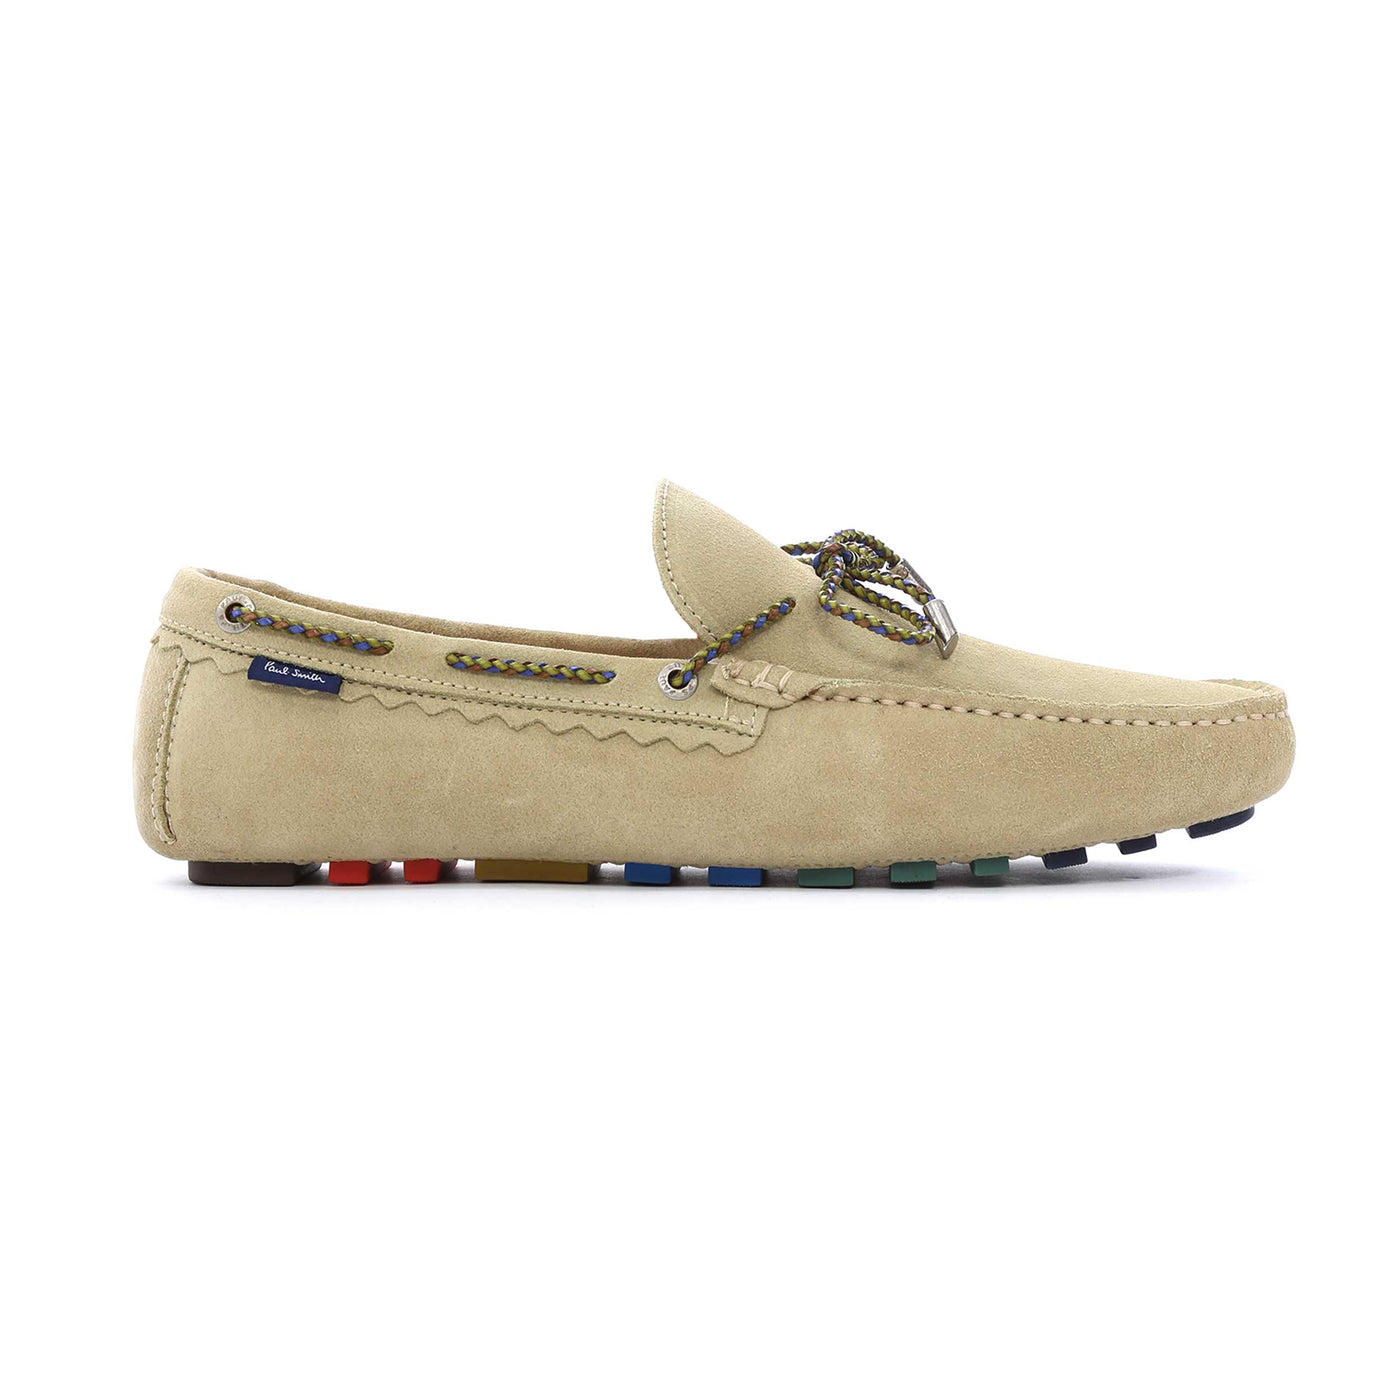 Paul Smith Springfield Loafer in Pistachio